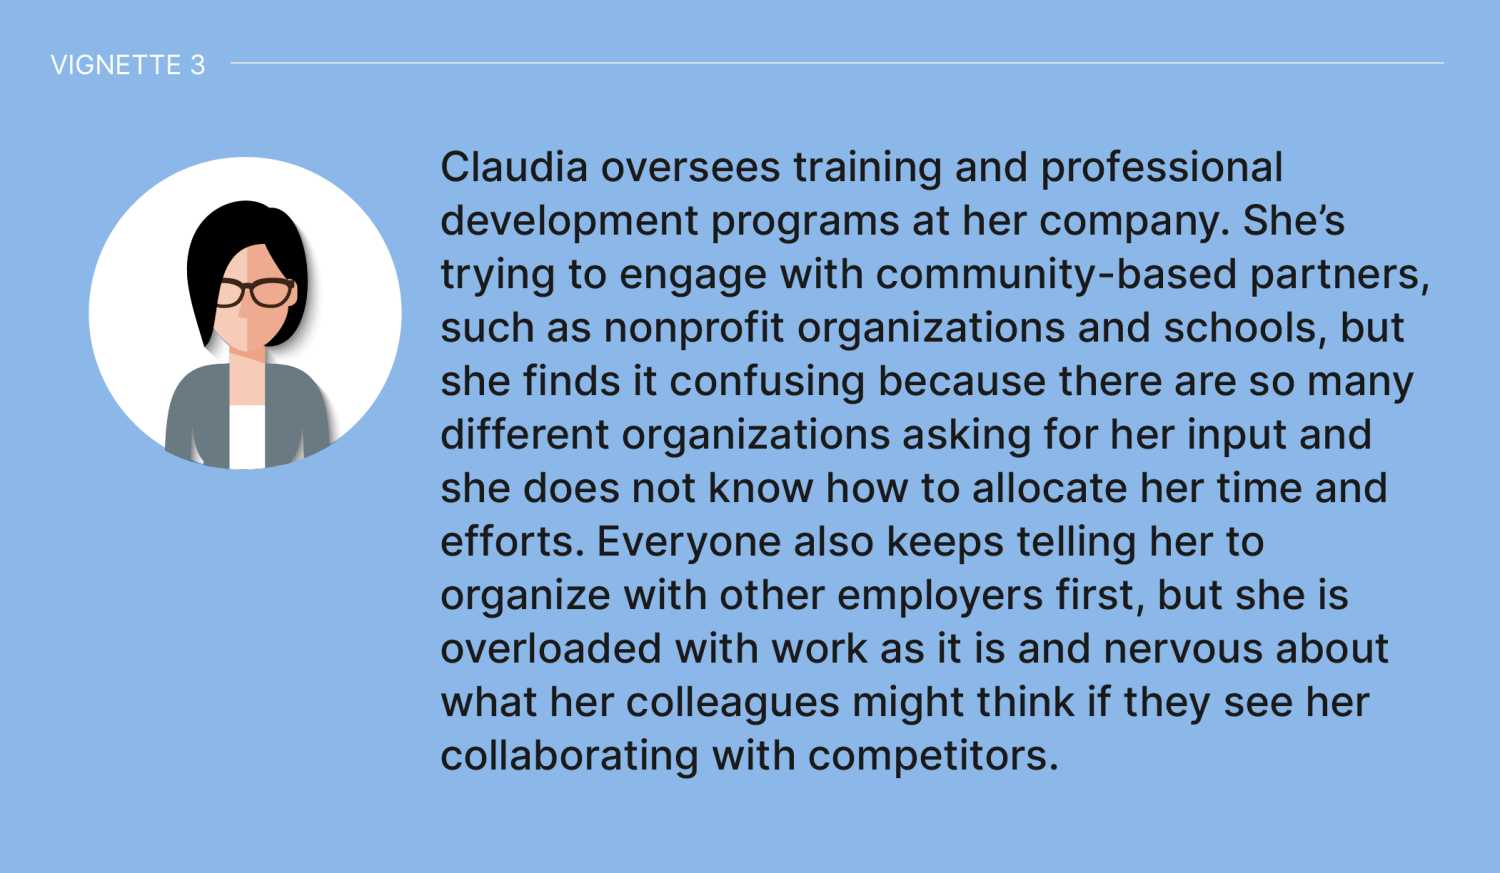 Vignette 3: Claudia oversees training and professional development programs at her company. She’s trying to engage with community-based partners, such as nonprofit organizations and schools, but she finds it confusing because there are so many different organizations asking for her input and she does not know how to allocate her time and efforts. Everyone also keeps telling her to organize with other employers first, but she is overloaded with work as it is and nervous about what her colleagues might think if they see her collaborating with competitors.